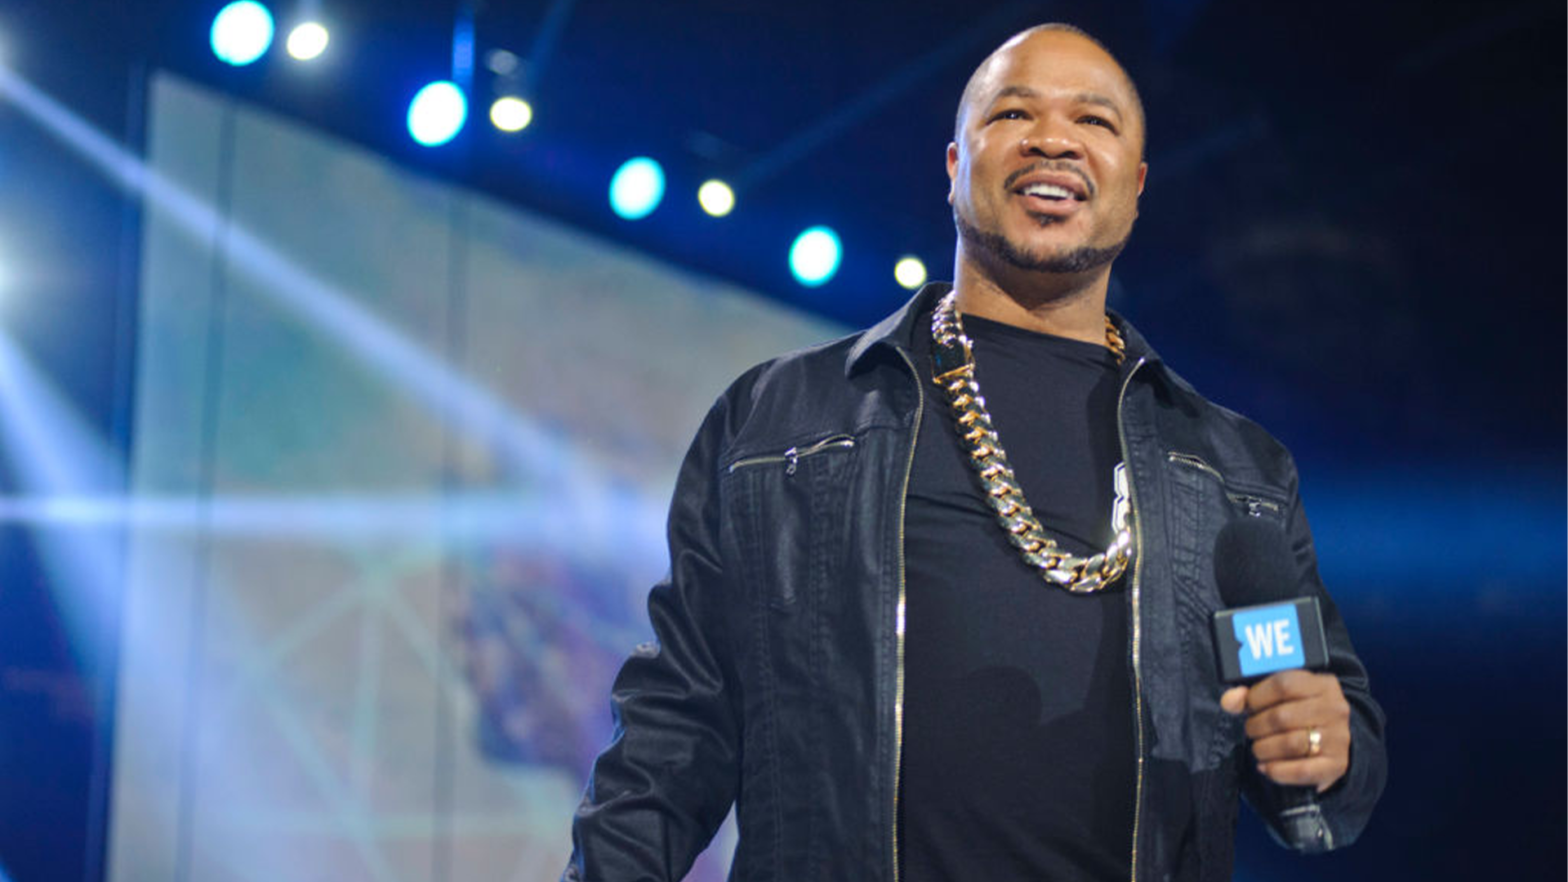 Xzibit Claims He's Owed Money By ViacomCBS For 'Pimp My Ride' — 'I've Been Quiet Long Enough'